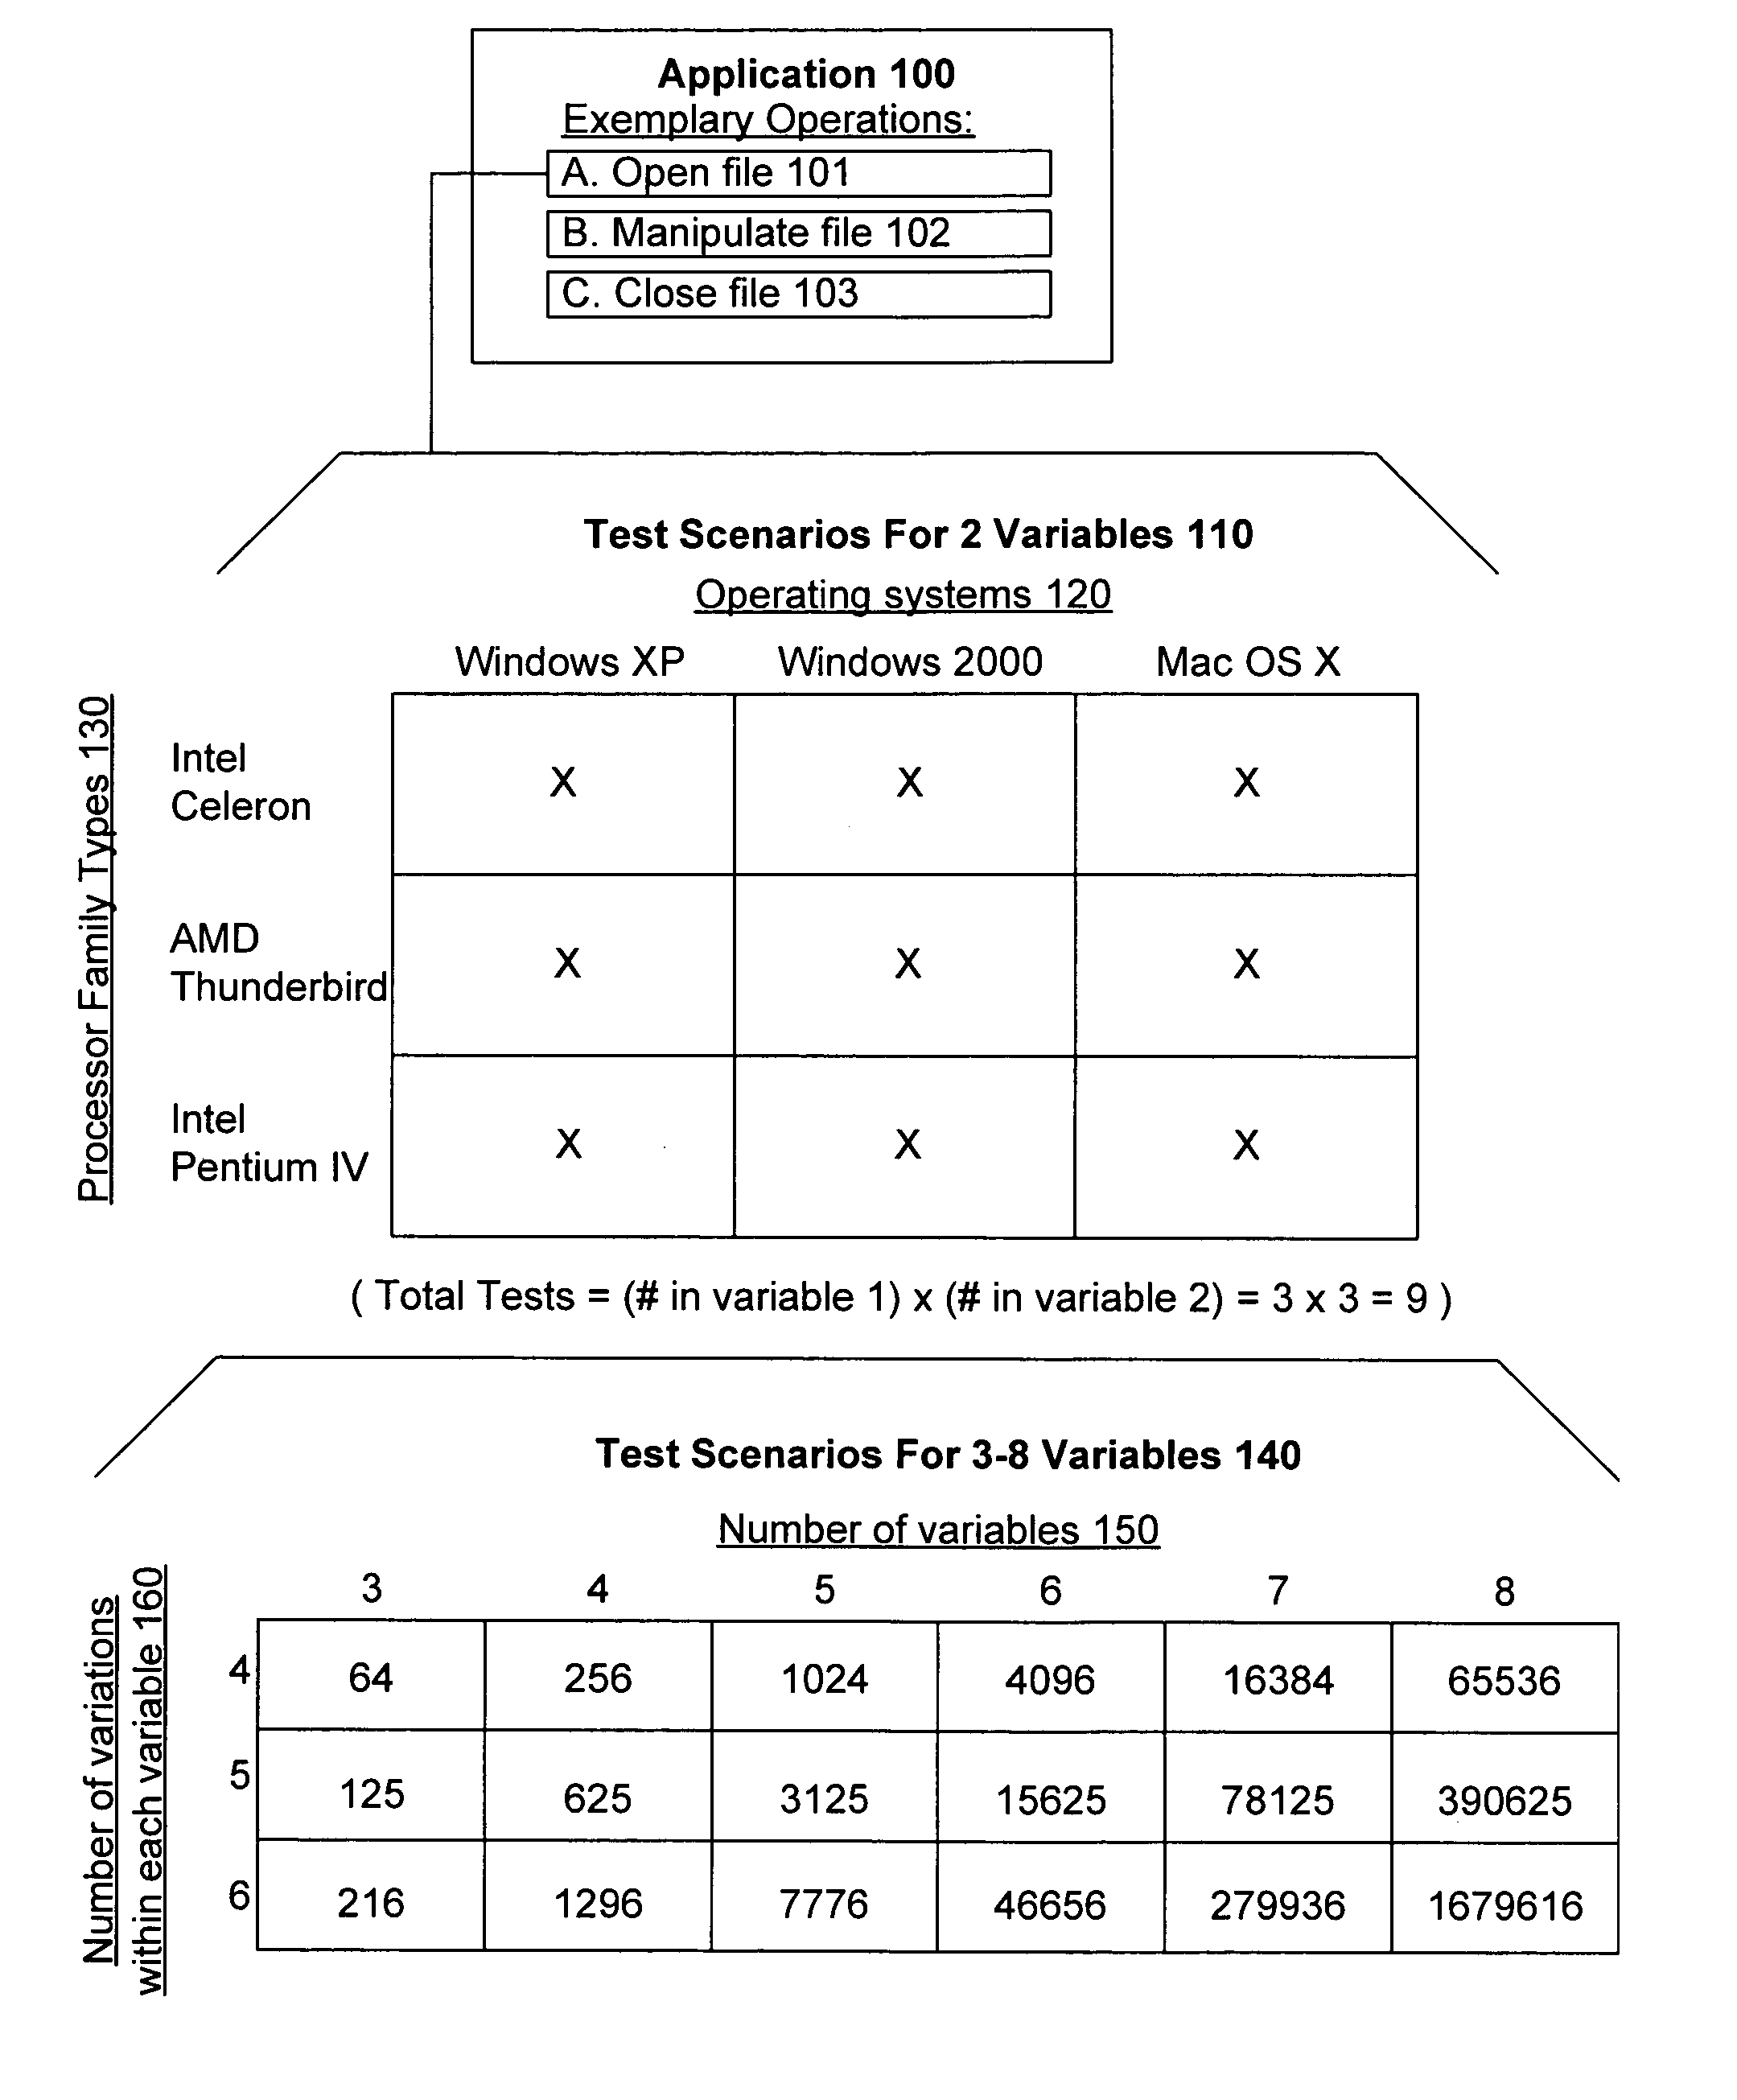 Systems and methods for automated classification and analysis of large volumes of test result data